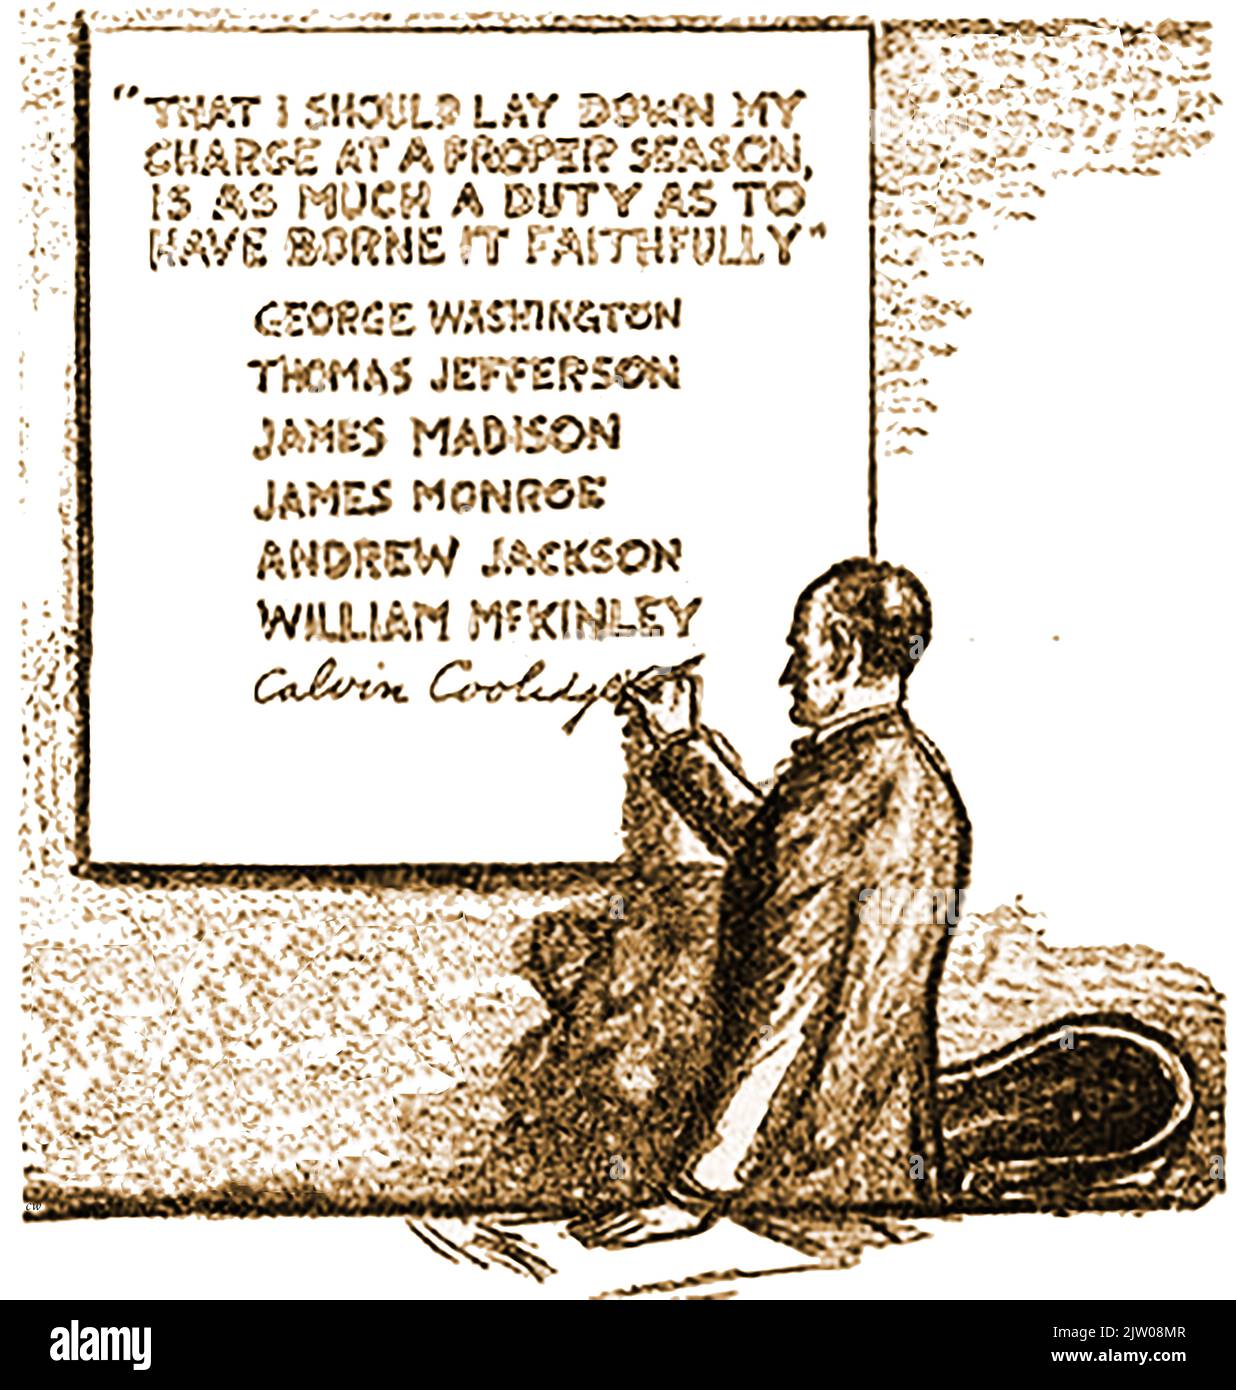 John Calvin Coolidge Jr , ( 1872 –  1933), 30th president of the United States (from 1923 to 1929)    ----------------------- A 1927  American political cartoon drawing of Calvin Coolidge adding his own name to a list of ex Presidents of the United States of America.  At the time he was heavily criticised, especially for his actions during the Great Mississippi Flood of 1927 and was expected to resign after stating  'I do not choose to run for President in 1928.' Stock Photo